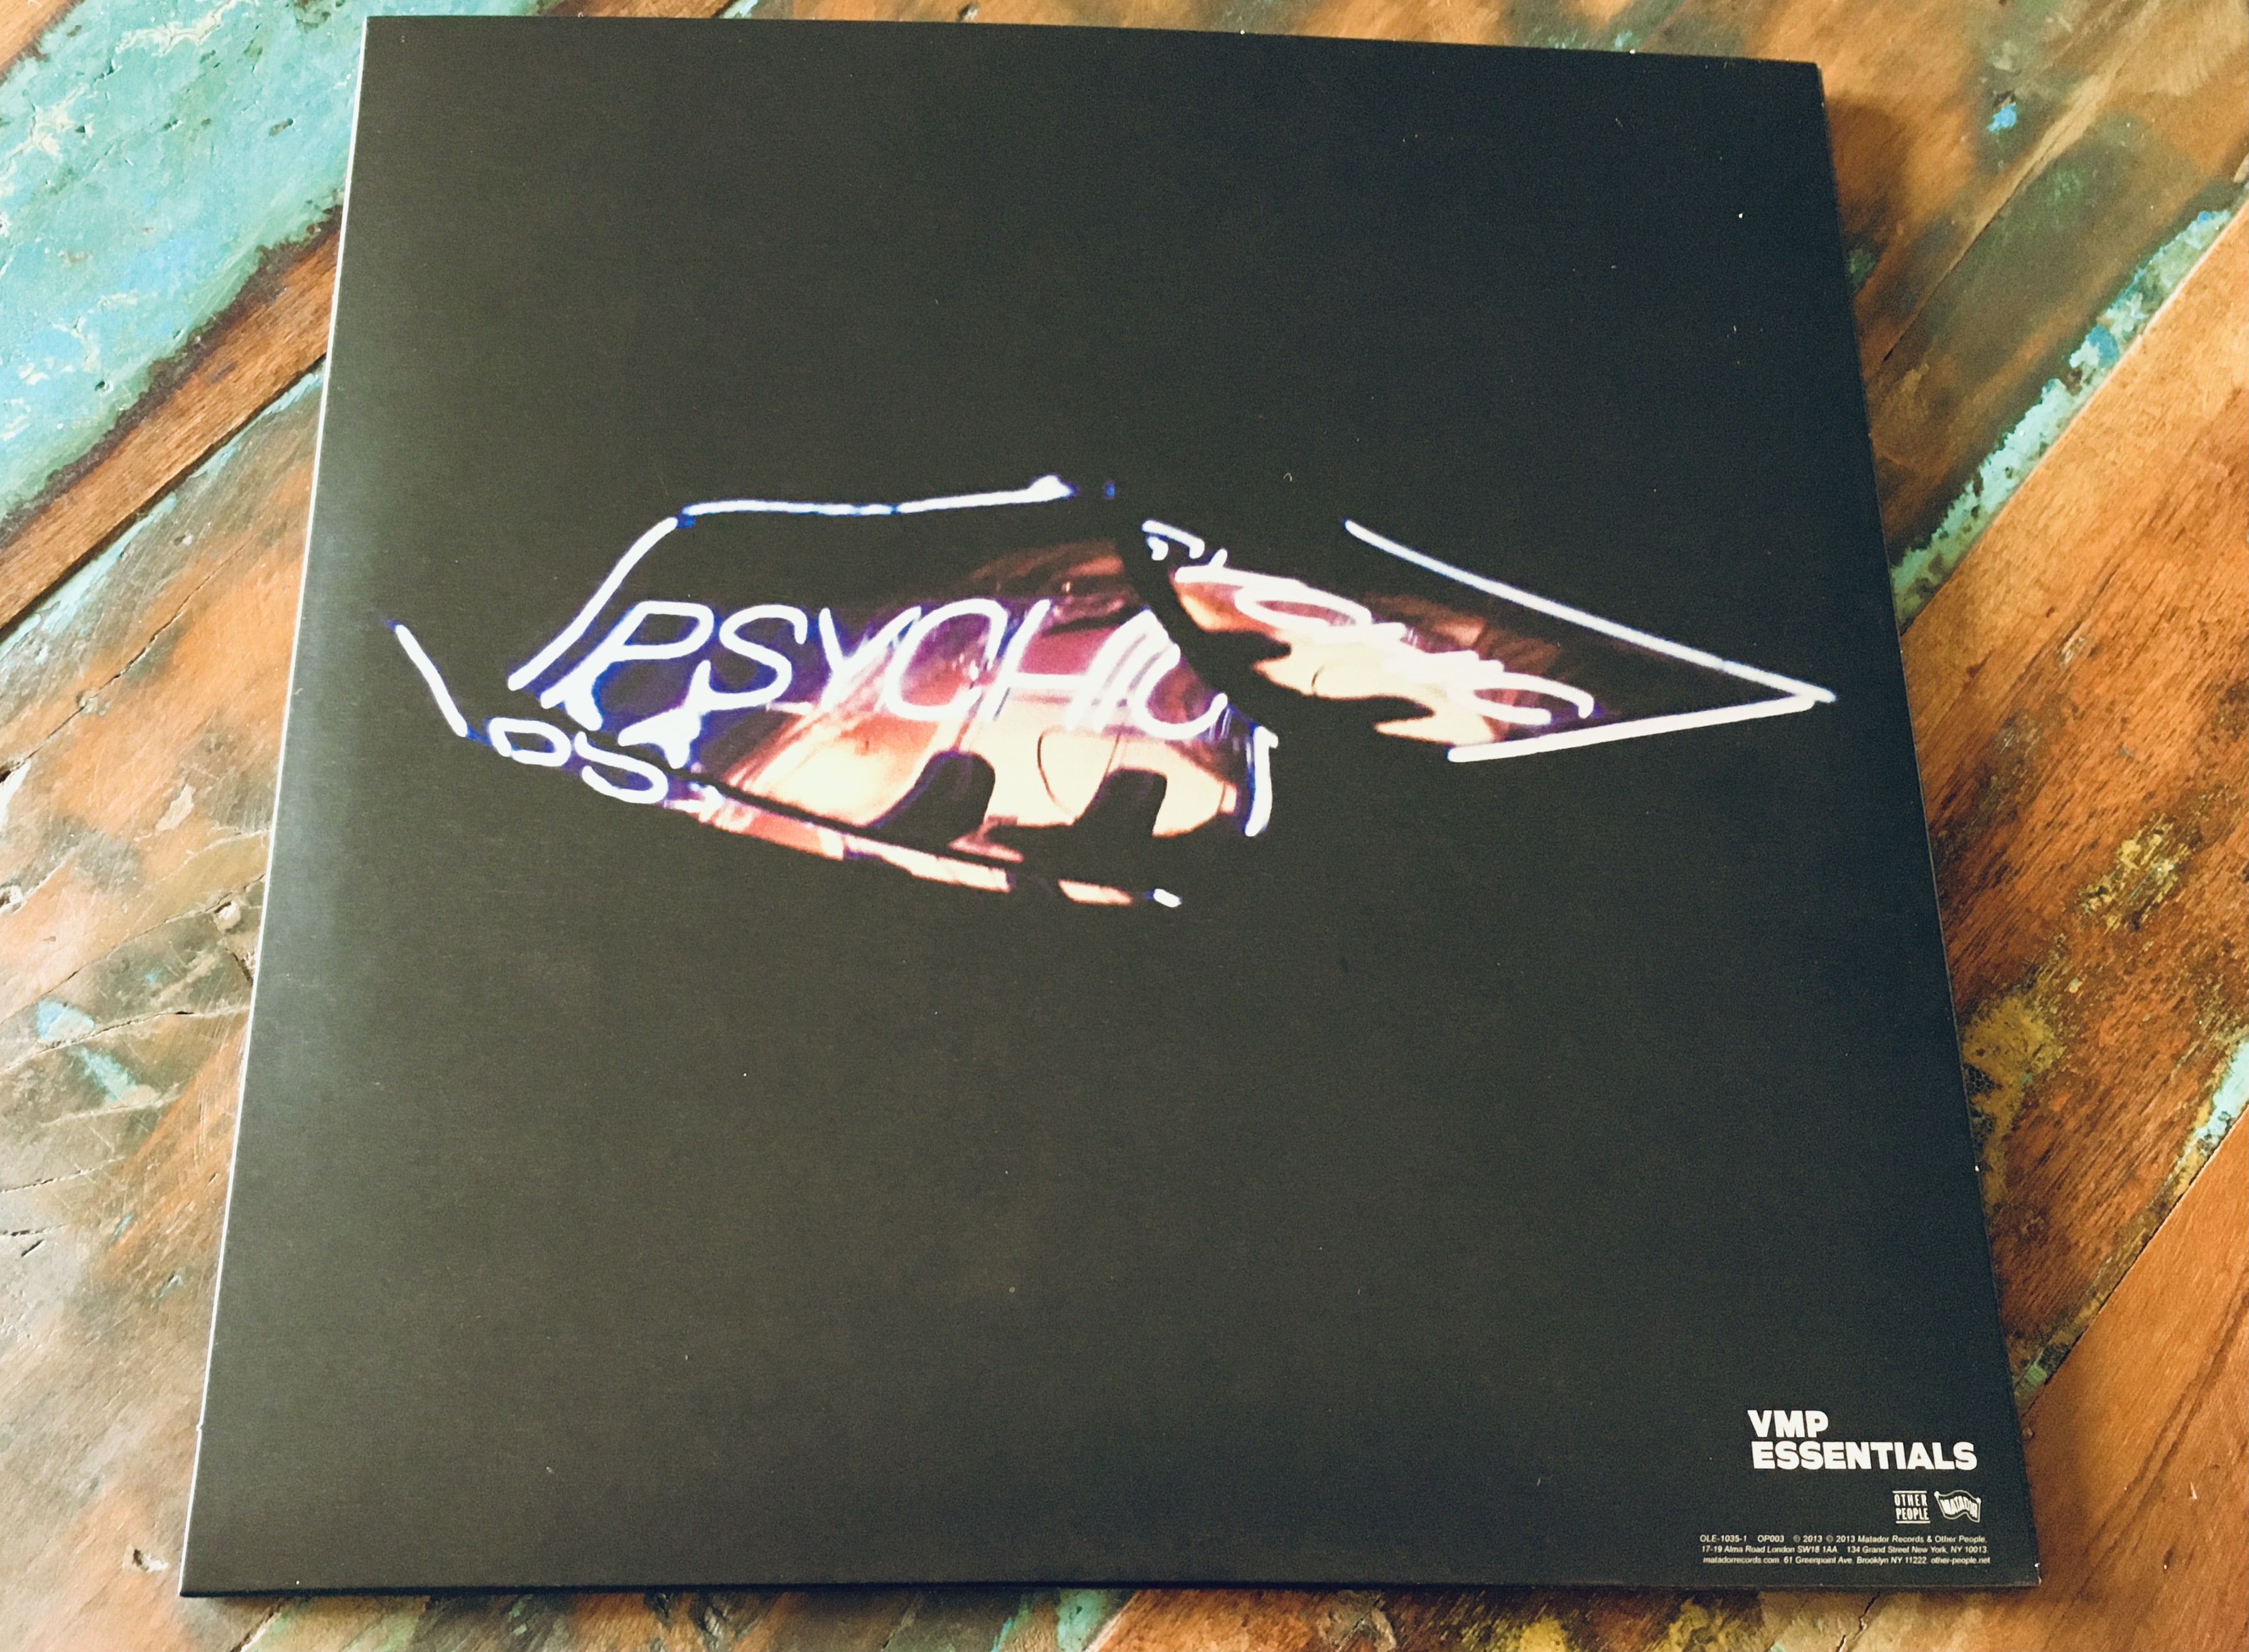 Geek insider, geekinsider, geekinsider. Com,, vinyl me please may 2021 unboxing: darkside "psychic", entertainment